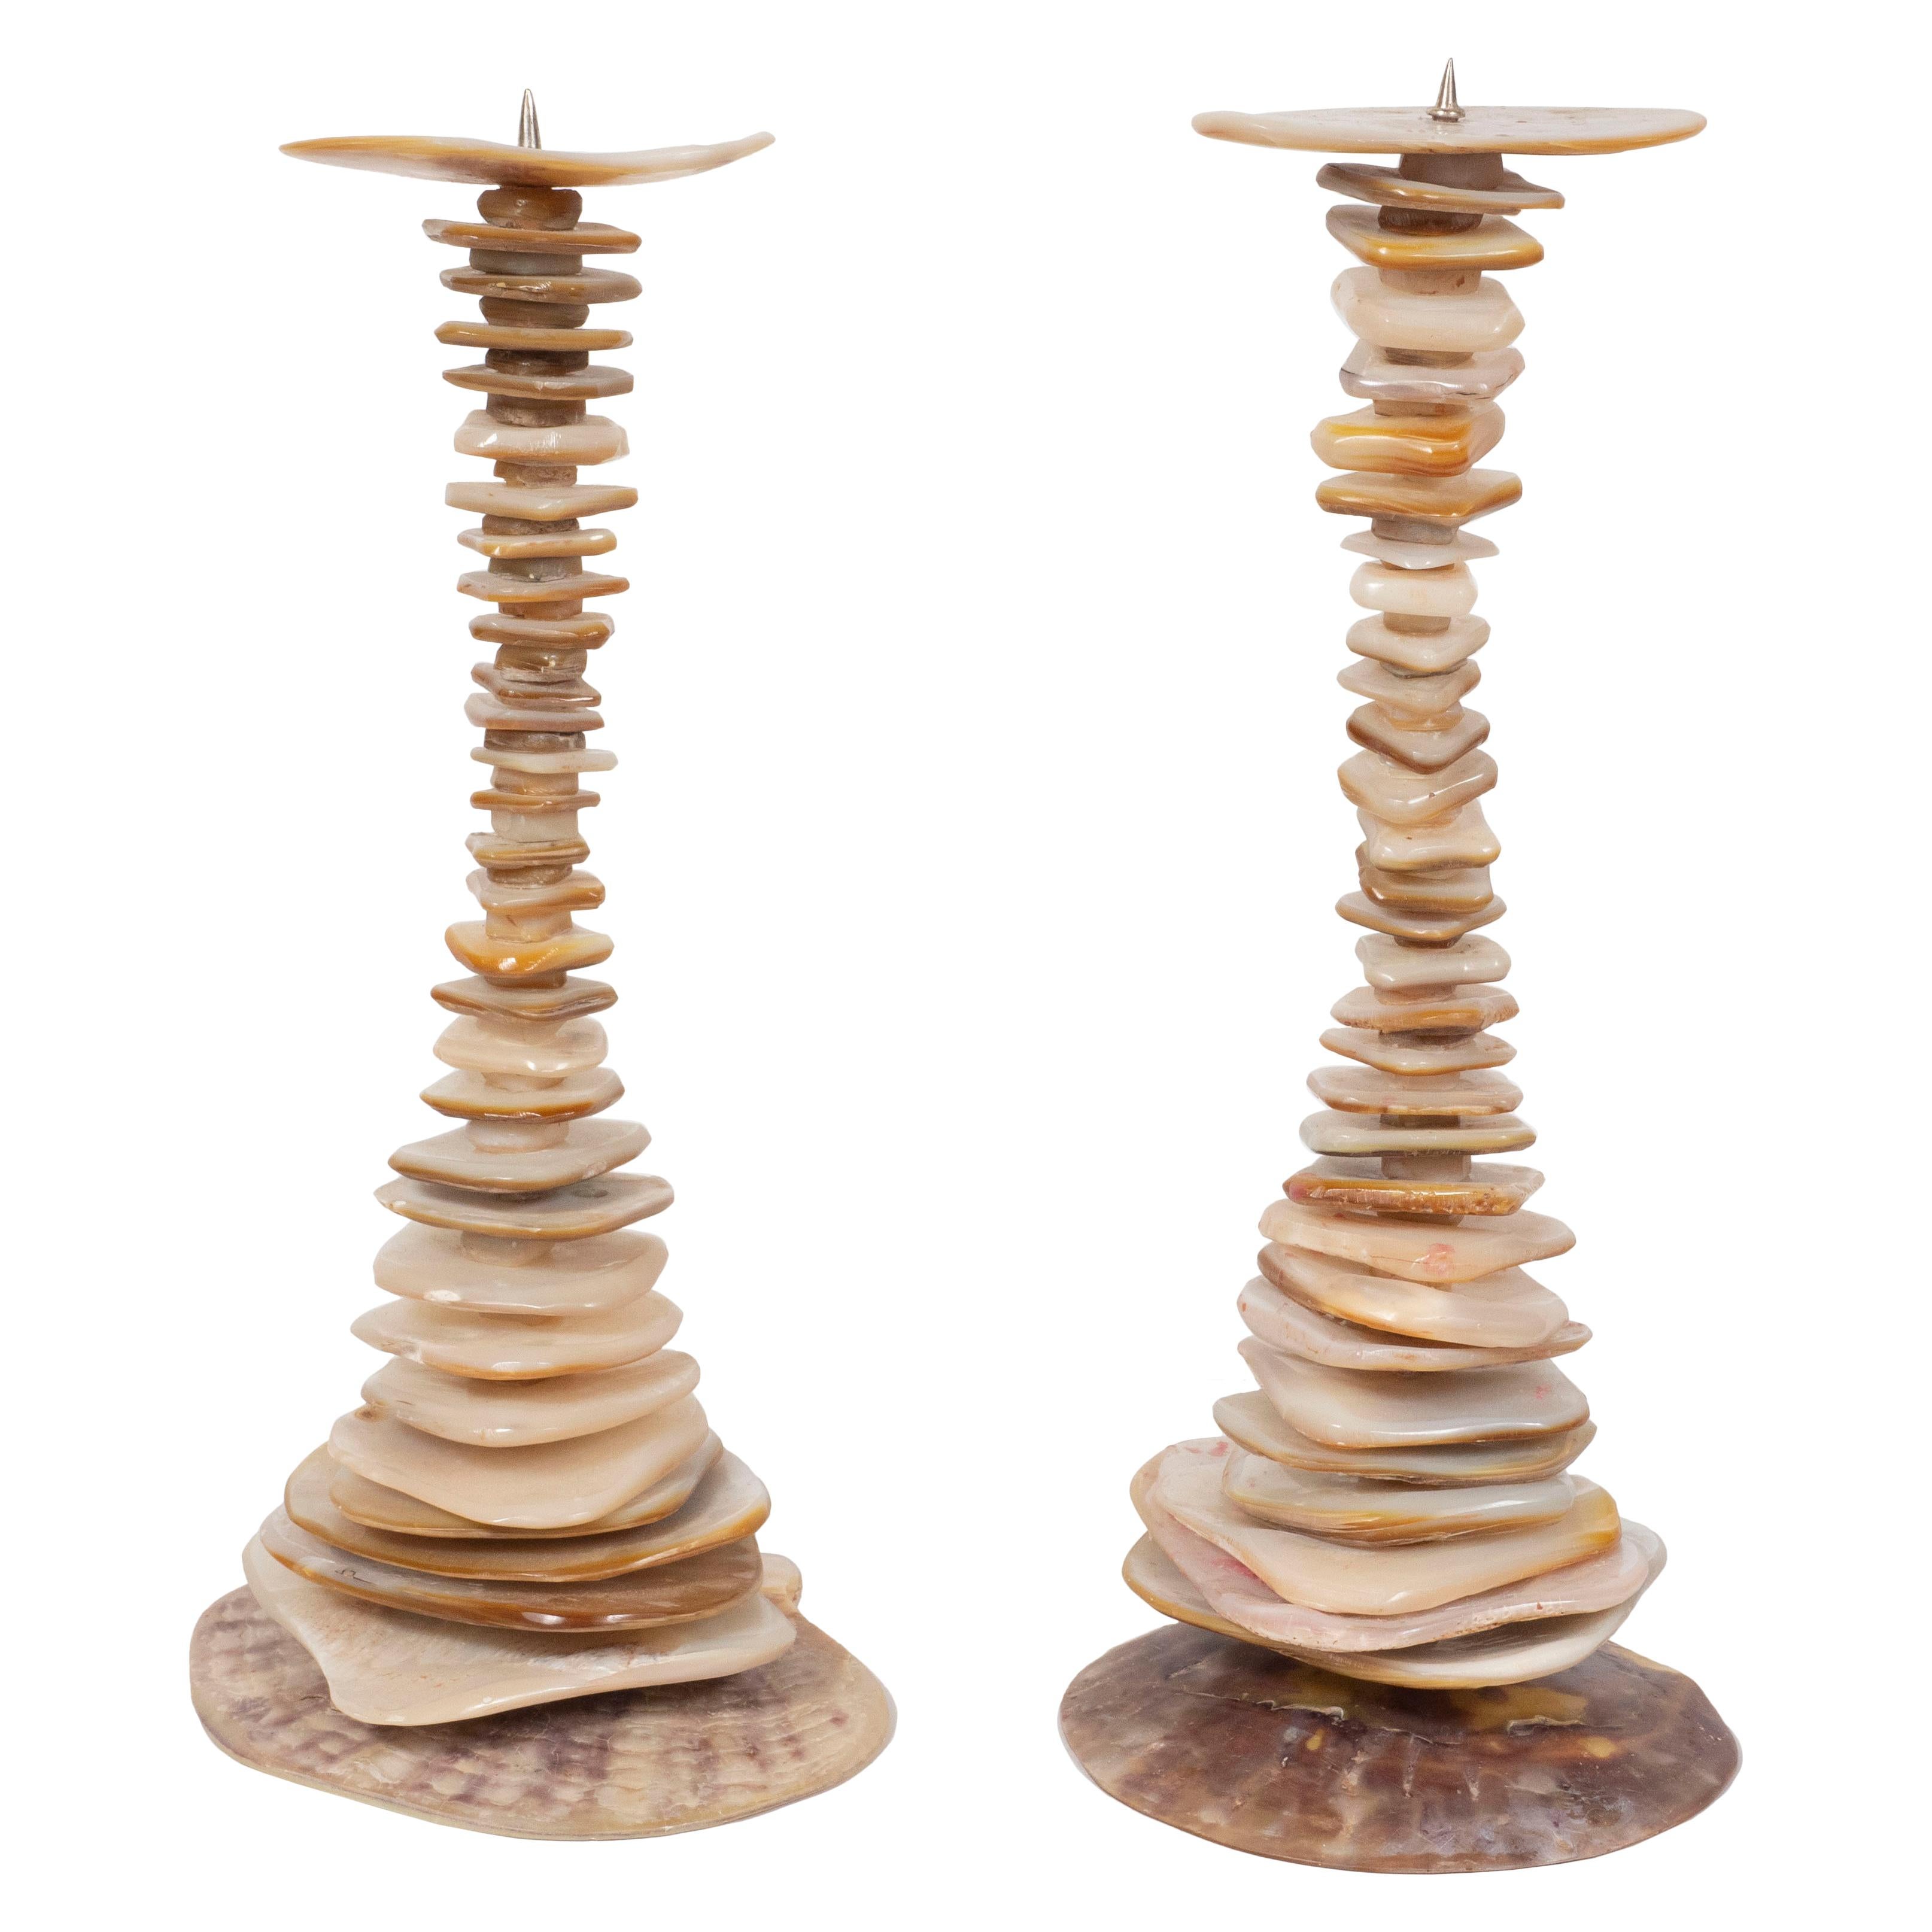 This elegant pair of organic modern candlesticks were realized in the Phillipines. They feature an hourglass form composed of an abundance of organically formed abalone fragments offering a variety of natural hues. With their naturally sophisticated